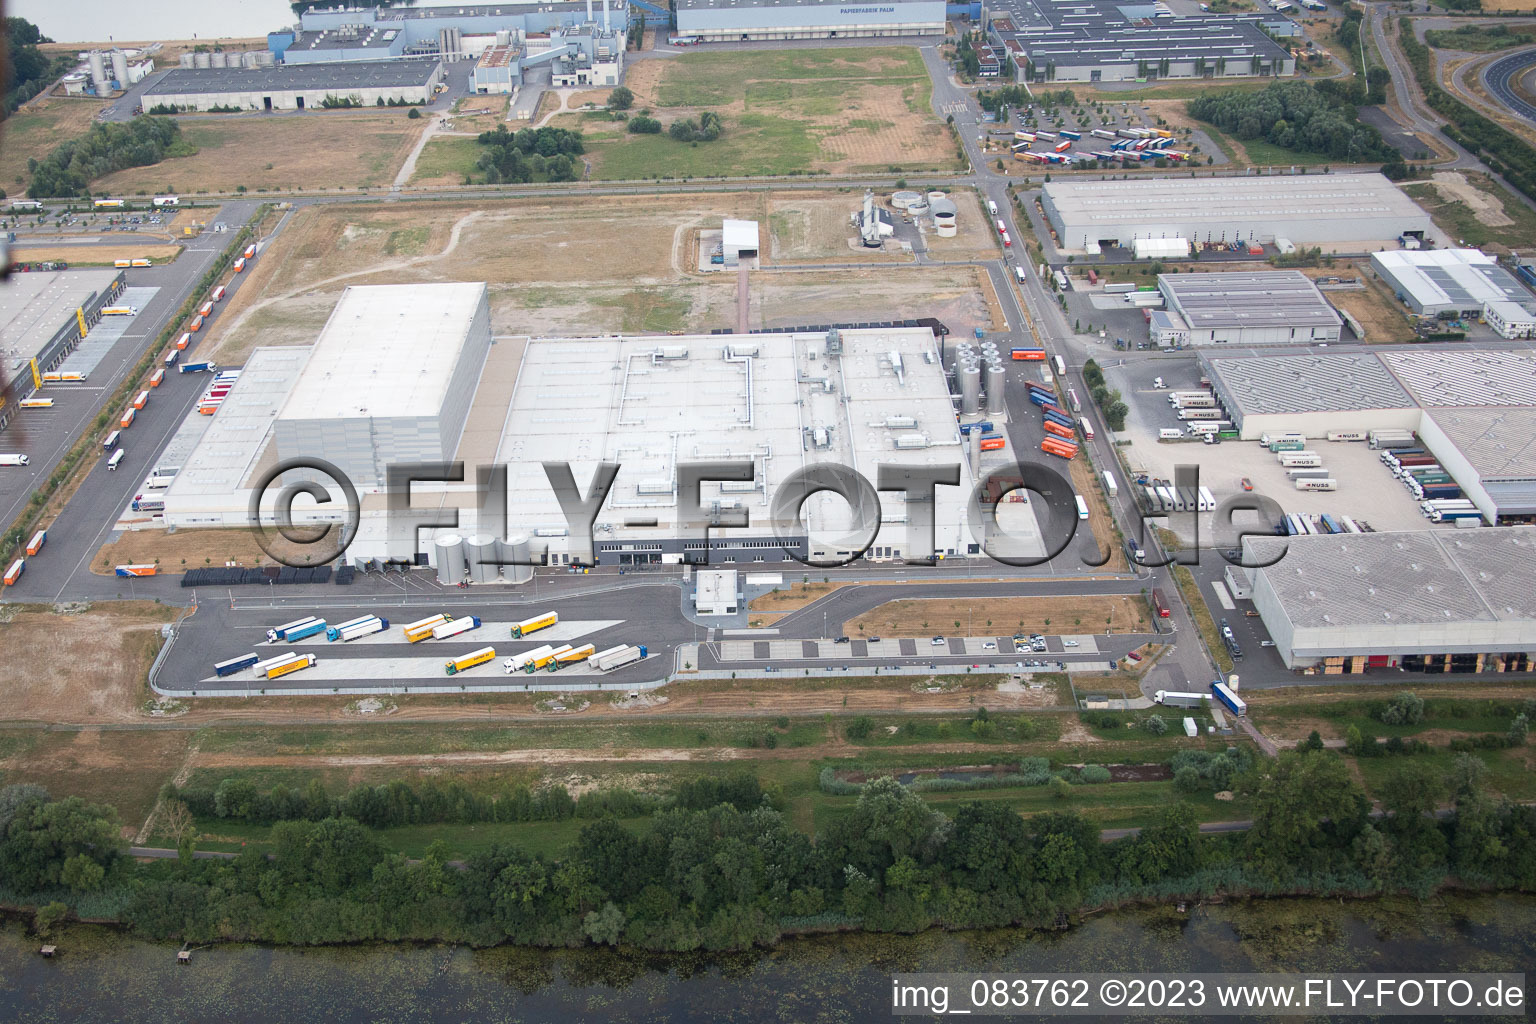 Aerial photograpy of Oberwald industrial area in Wörth am Rhein in the state Rhineland-Palatinate, Germany